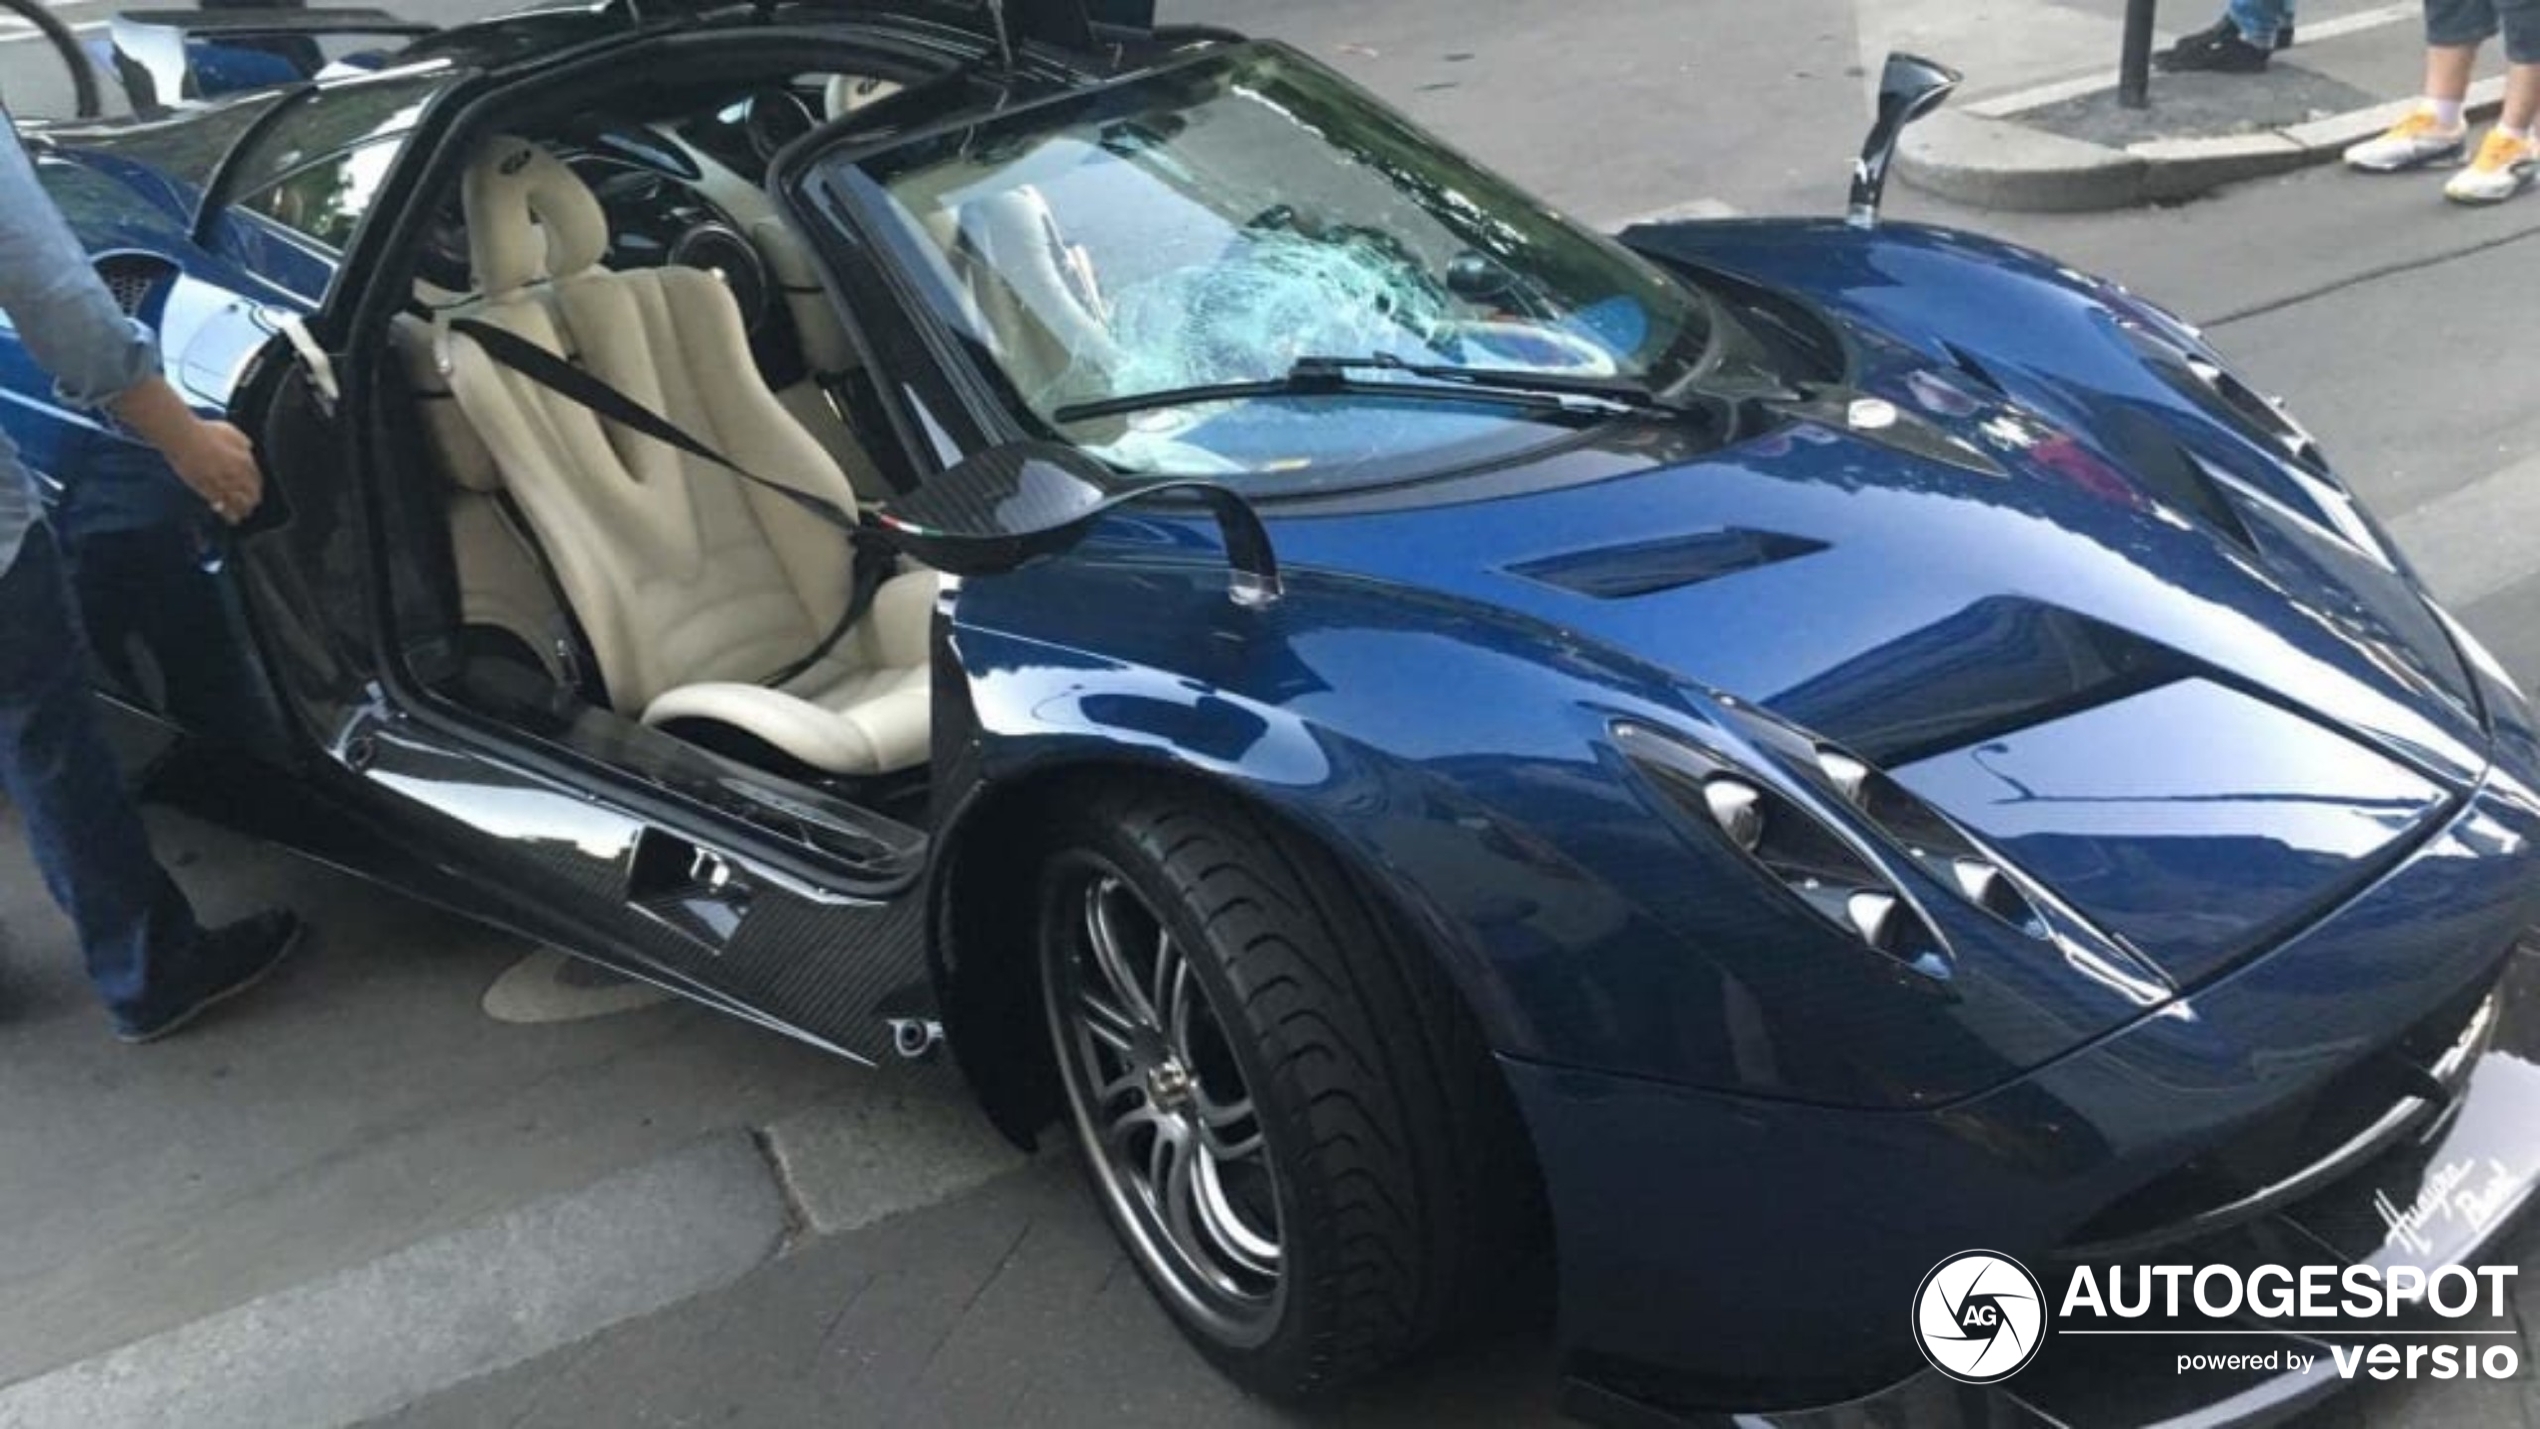 The Huayra Pearl crash is now seven years in the past